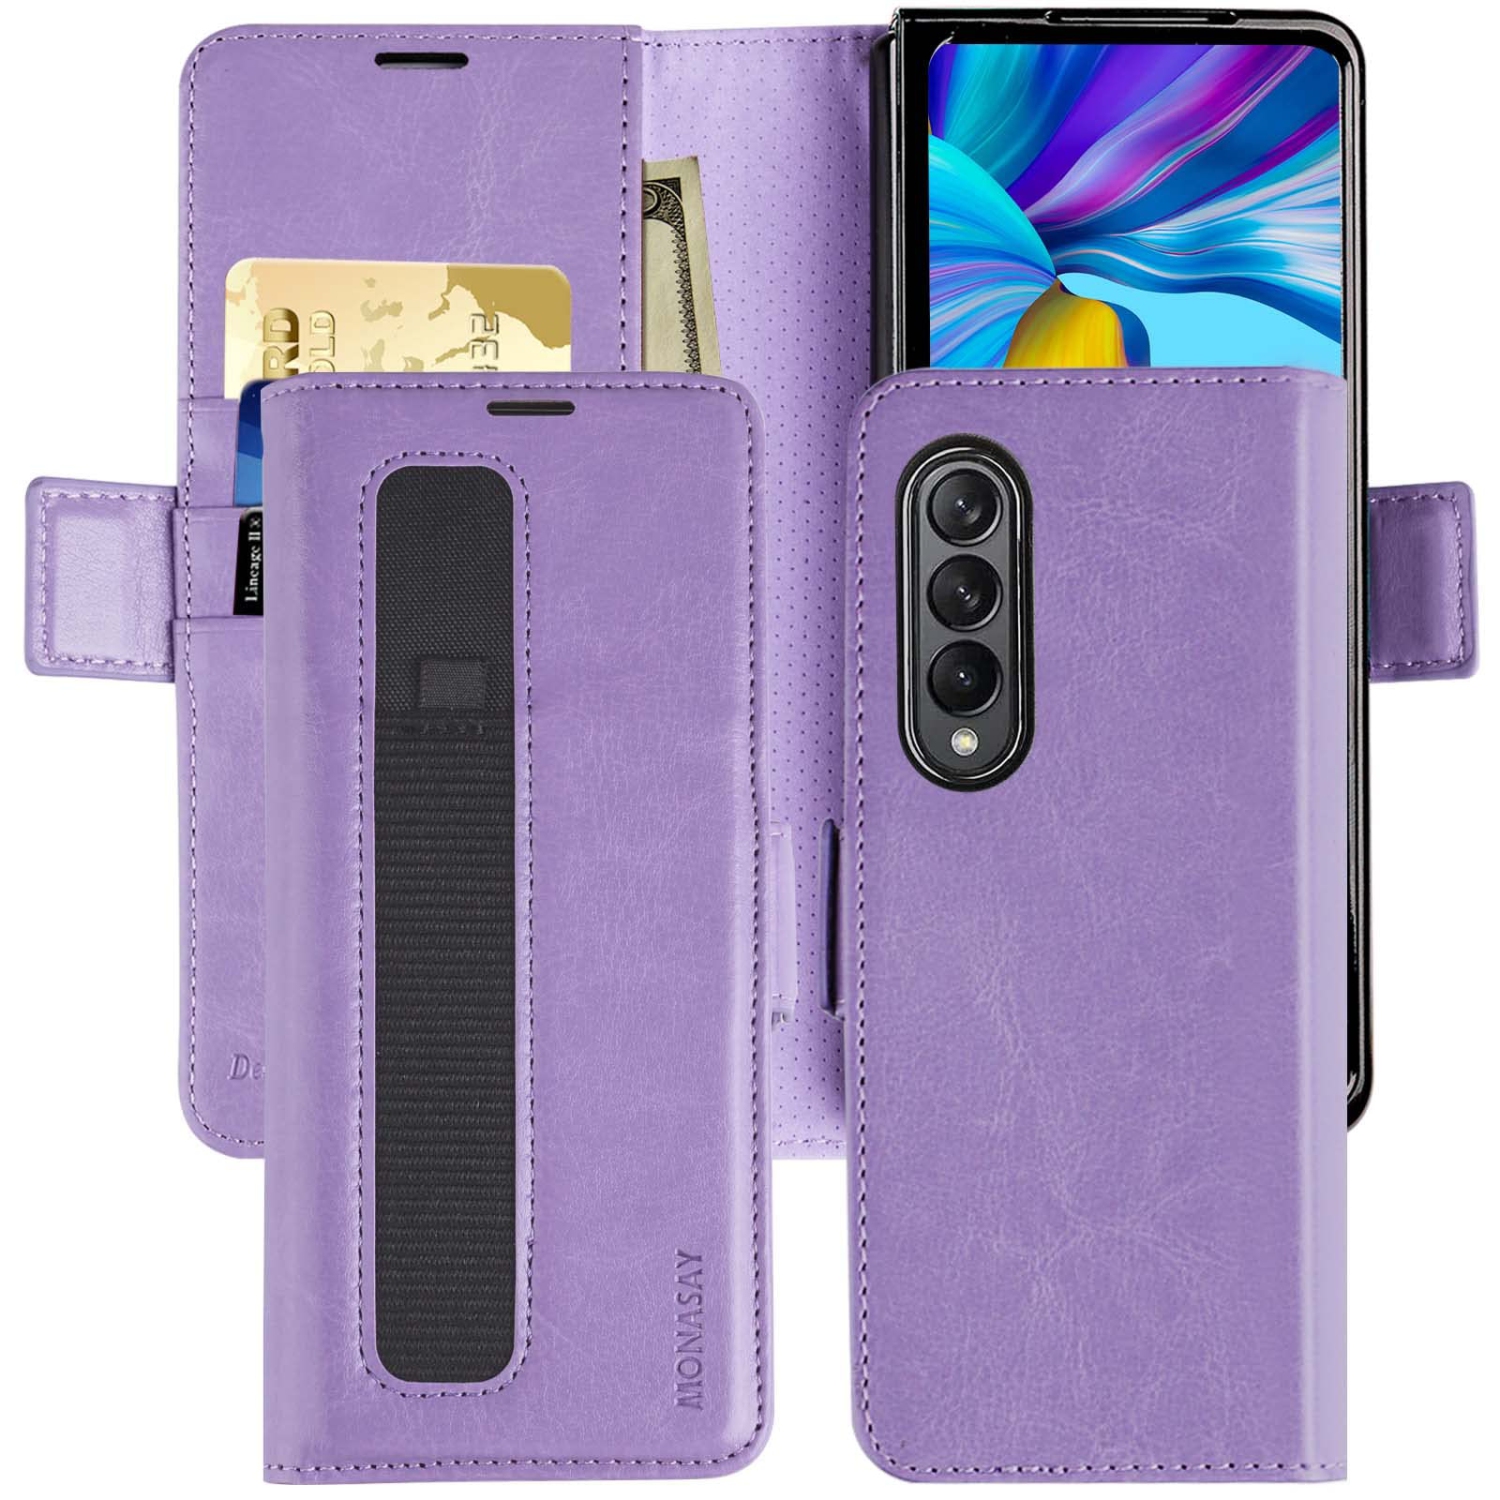 MONASAY Galaxy Z Fold 3 5G Wallet Case with S Pen Holder, Flip Folio Leather Cell Phone Cover with RFID Blocking Credit Card